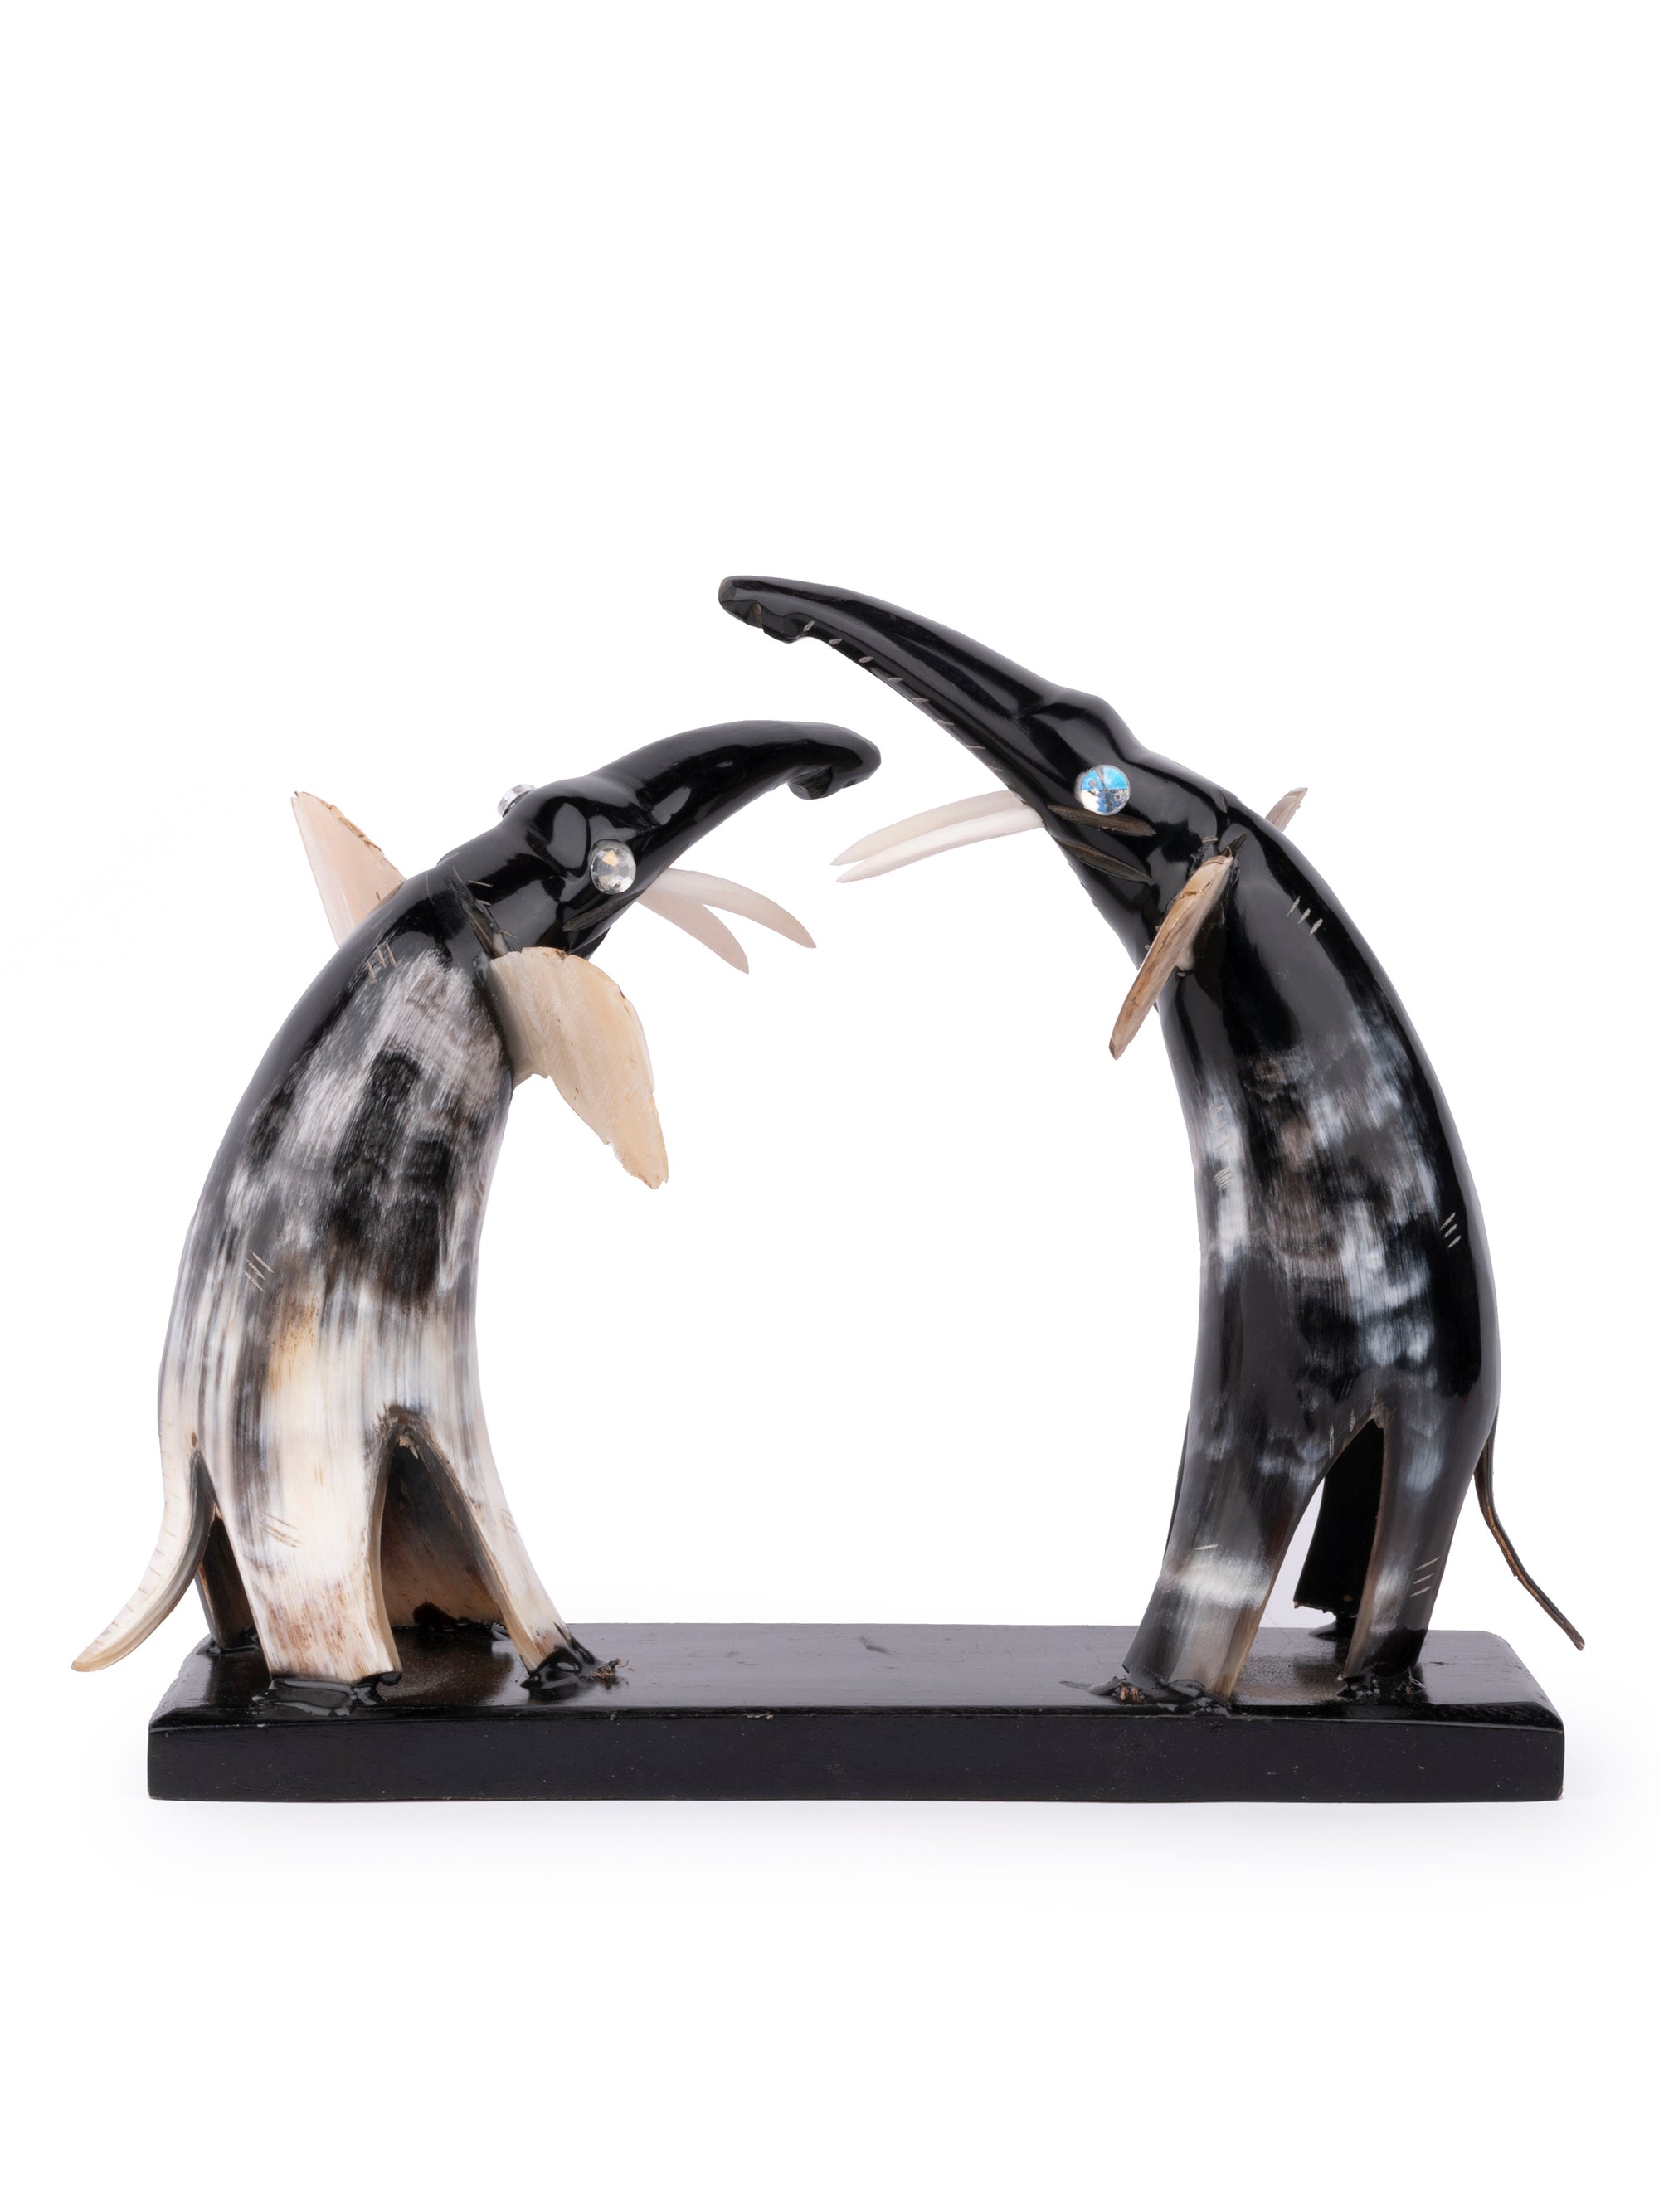 Natural Buffalo Horn Pair of Elephant Decorative Showpiece - 10 inches - The Heritage Artifacts